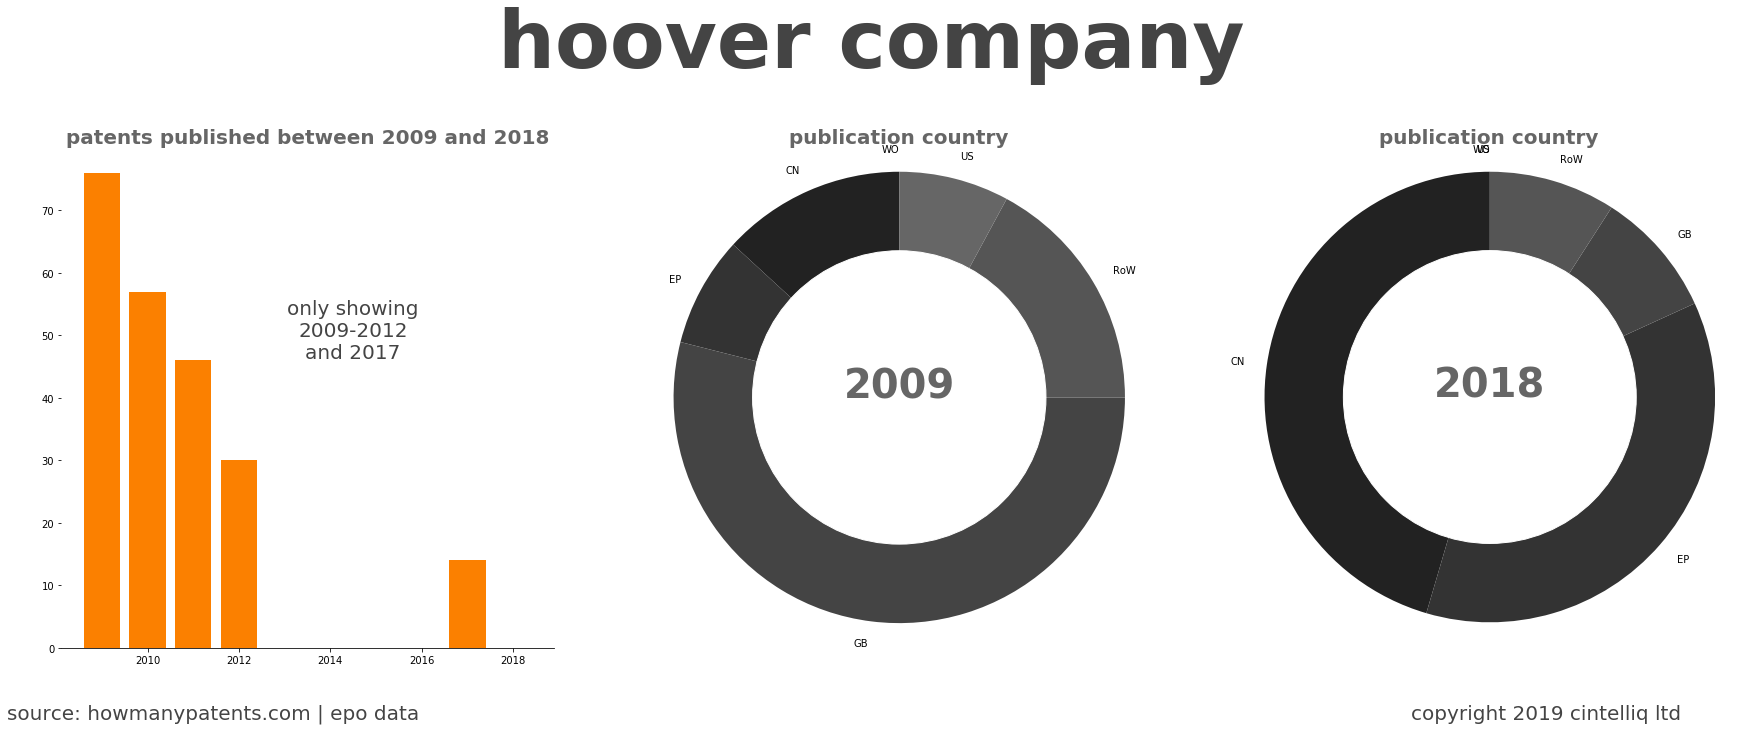 summary of patents for Hoover Company